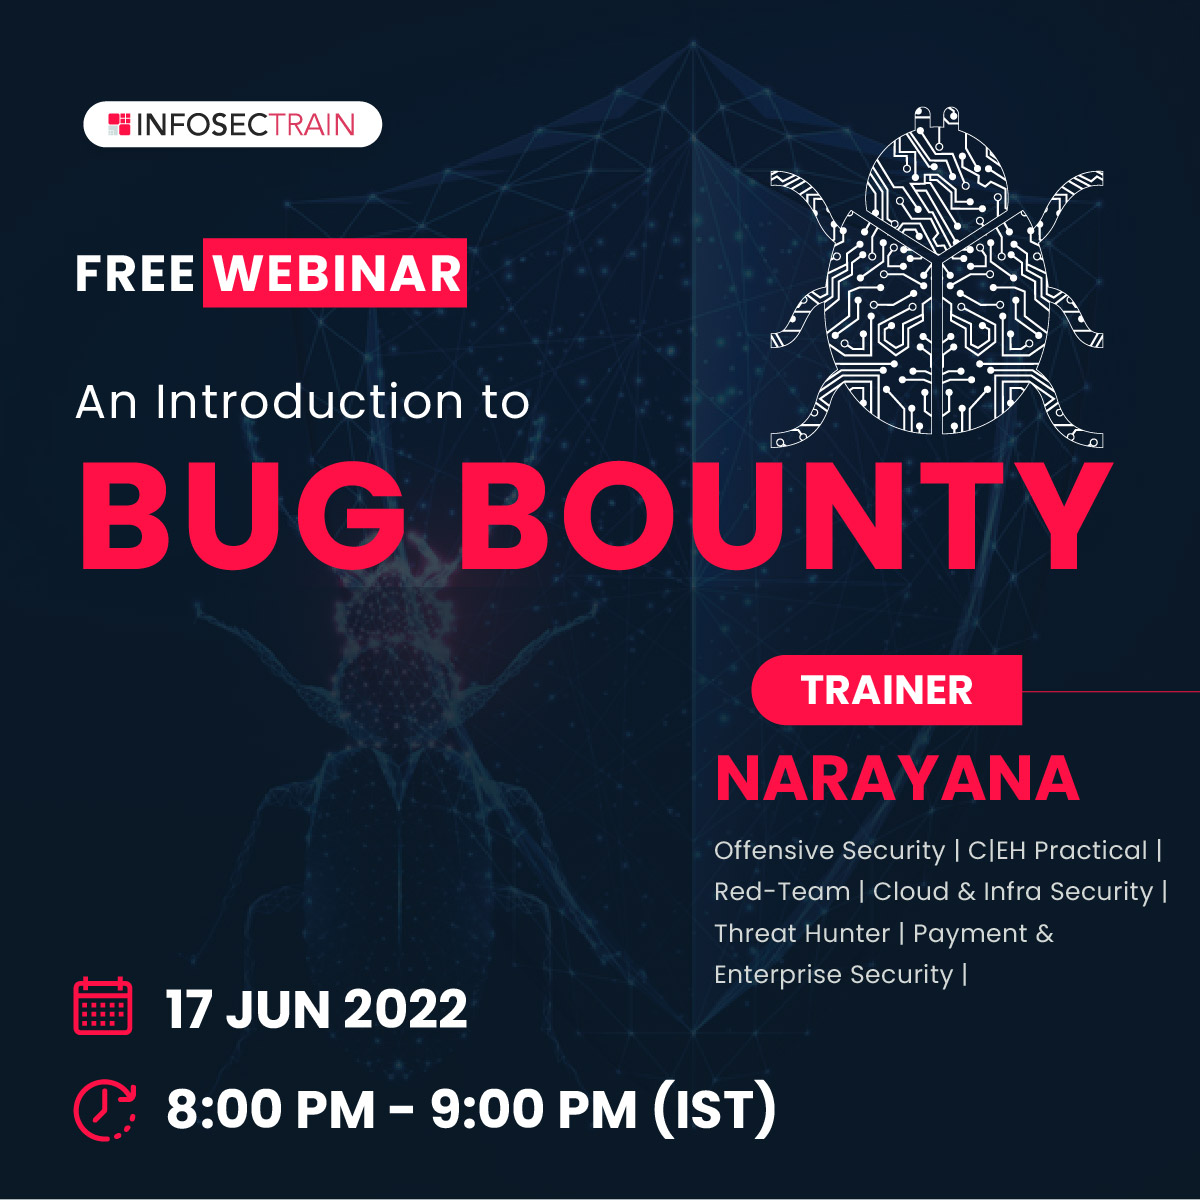 Free Webinar -An Introduction to Bug Bounty, Online Event